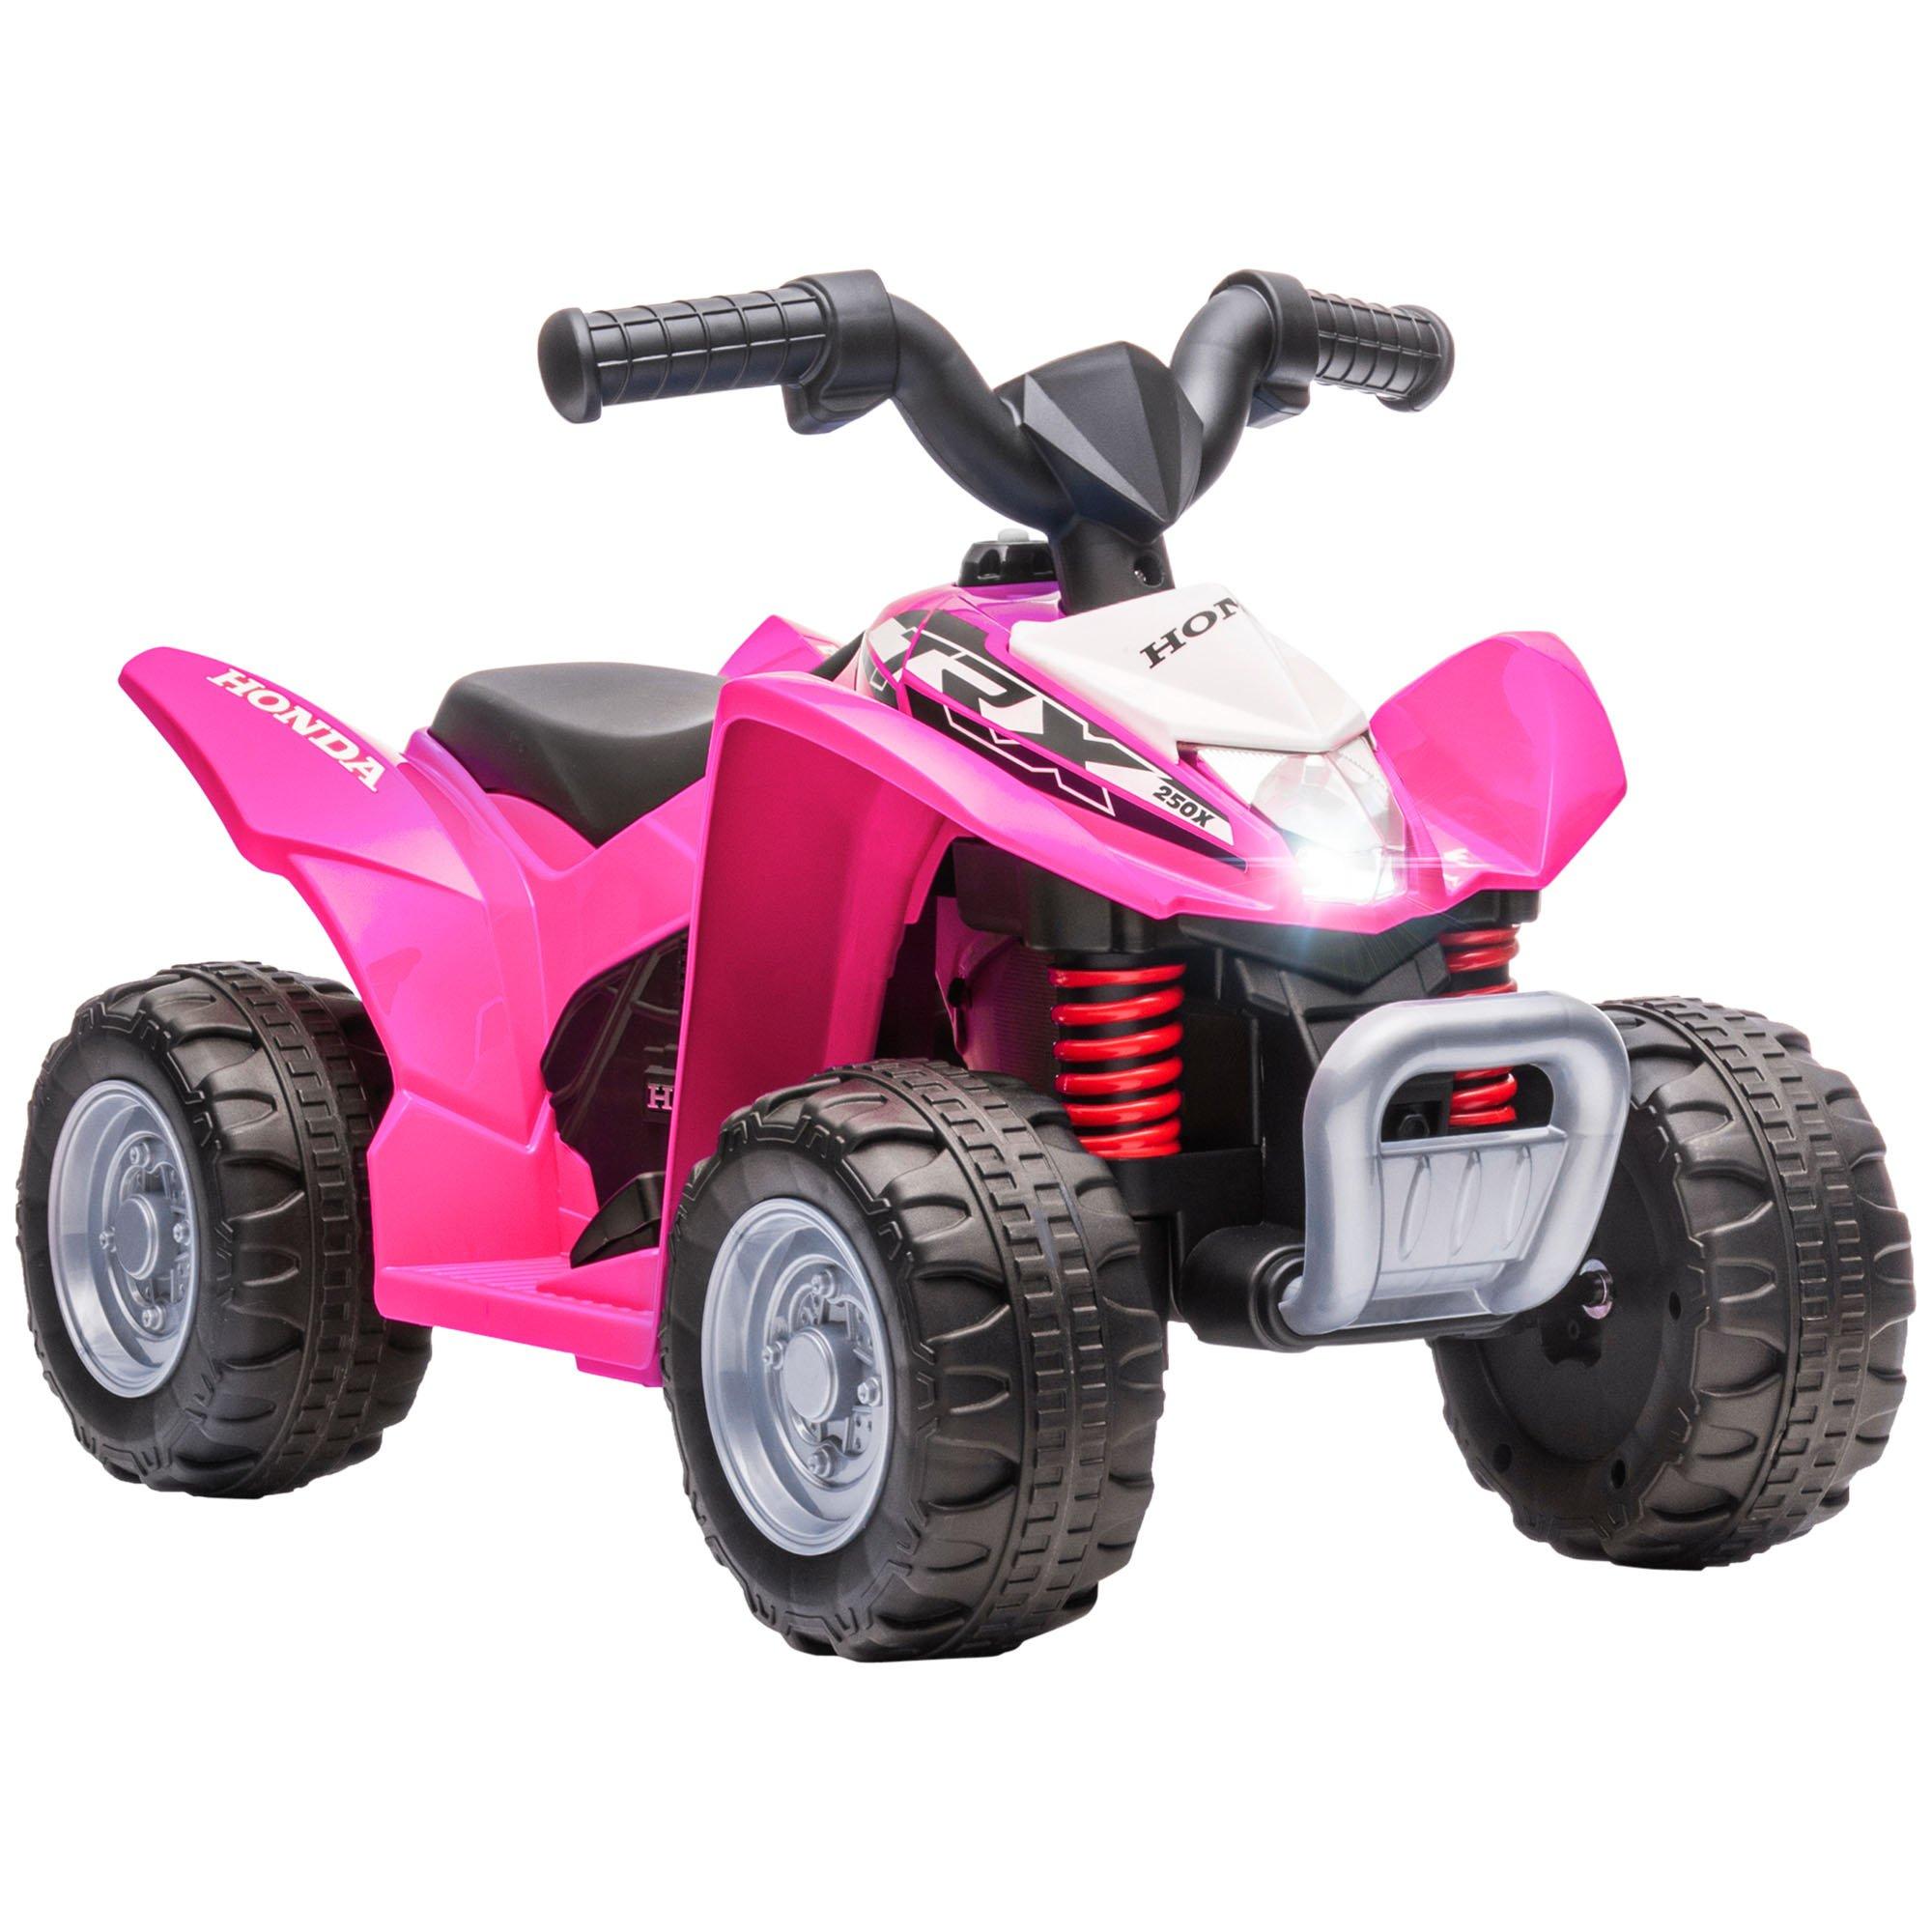 6V Honda Licensed Kids Electric Ride on ATV Toy for 1.5-3 Years